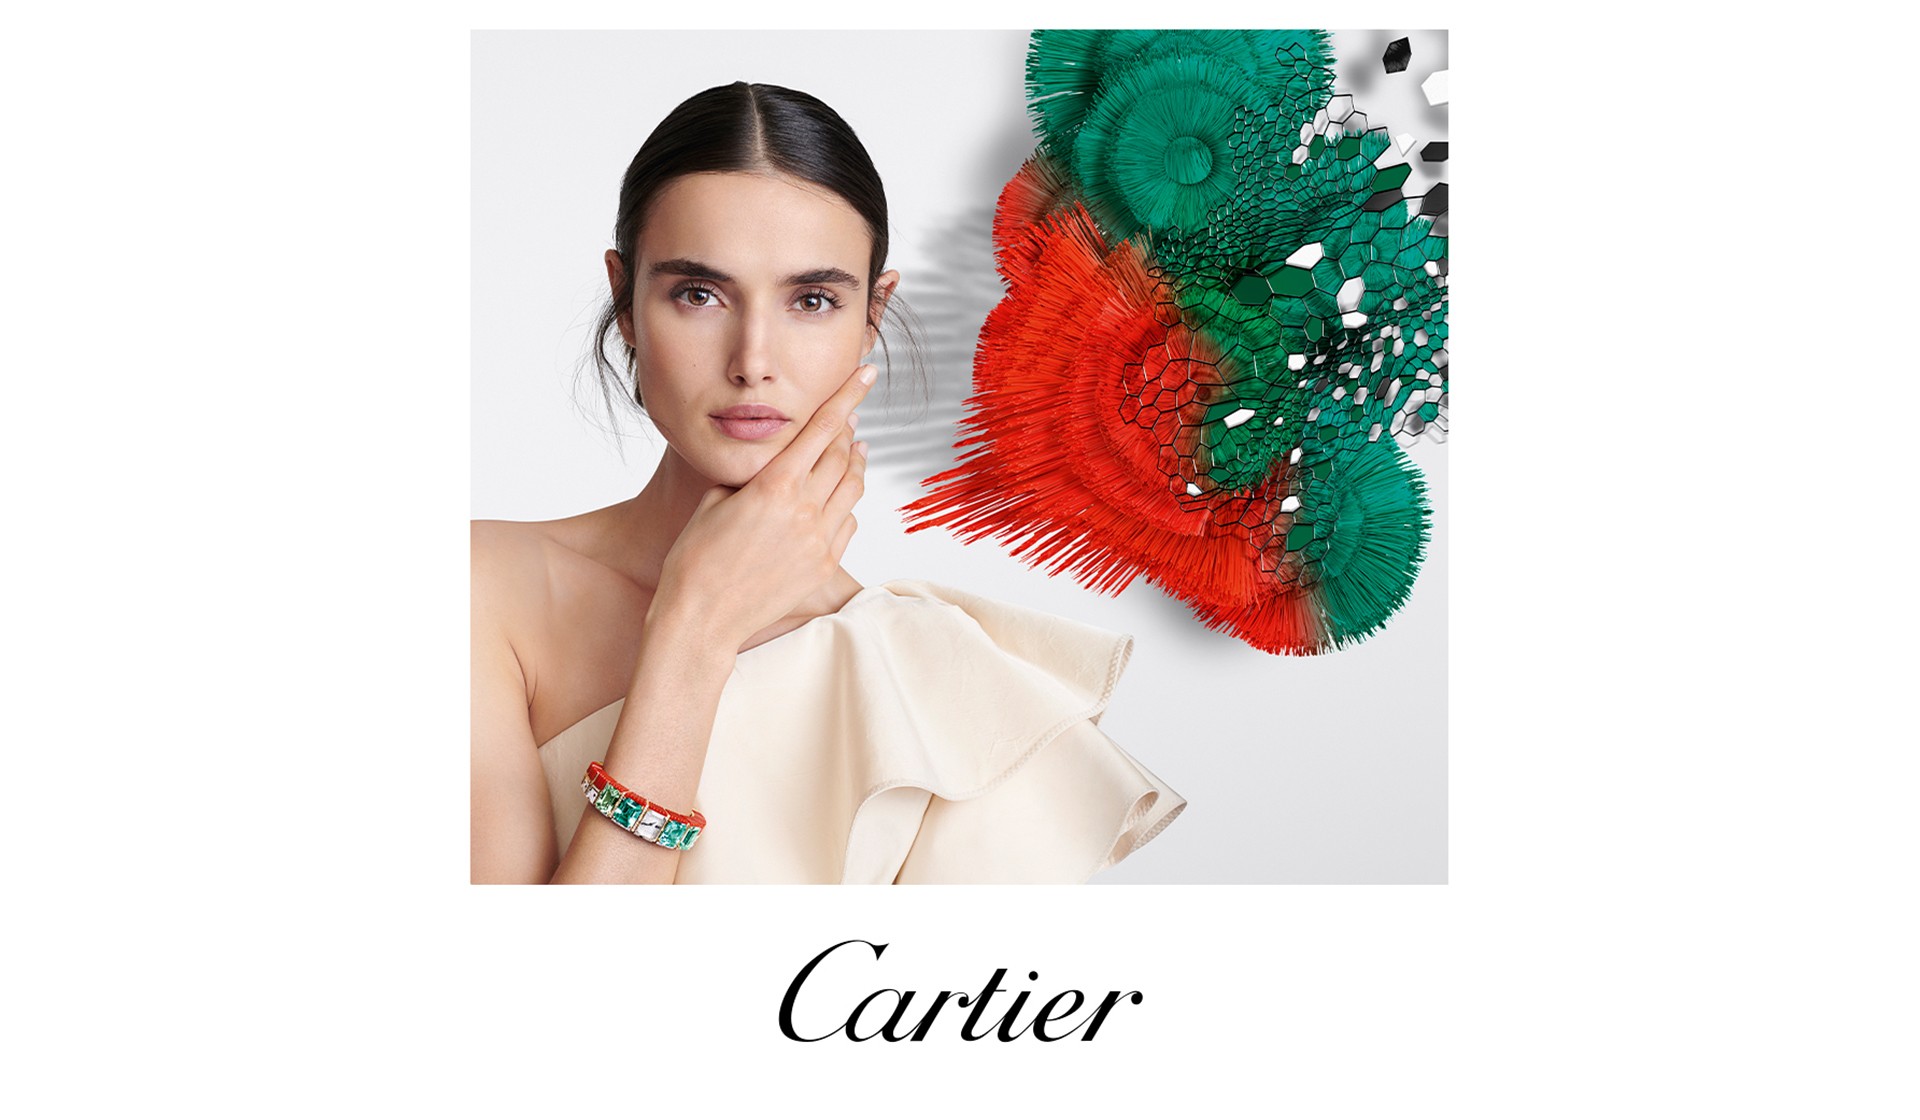 Cartier's High Jewelry Collection